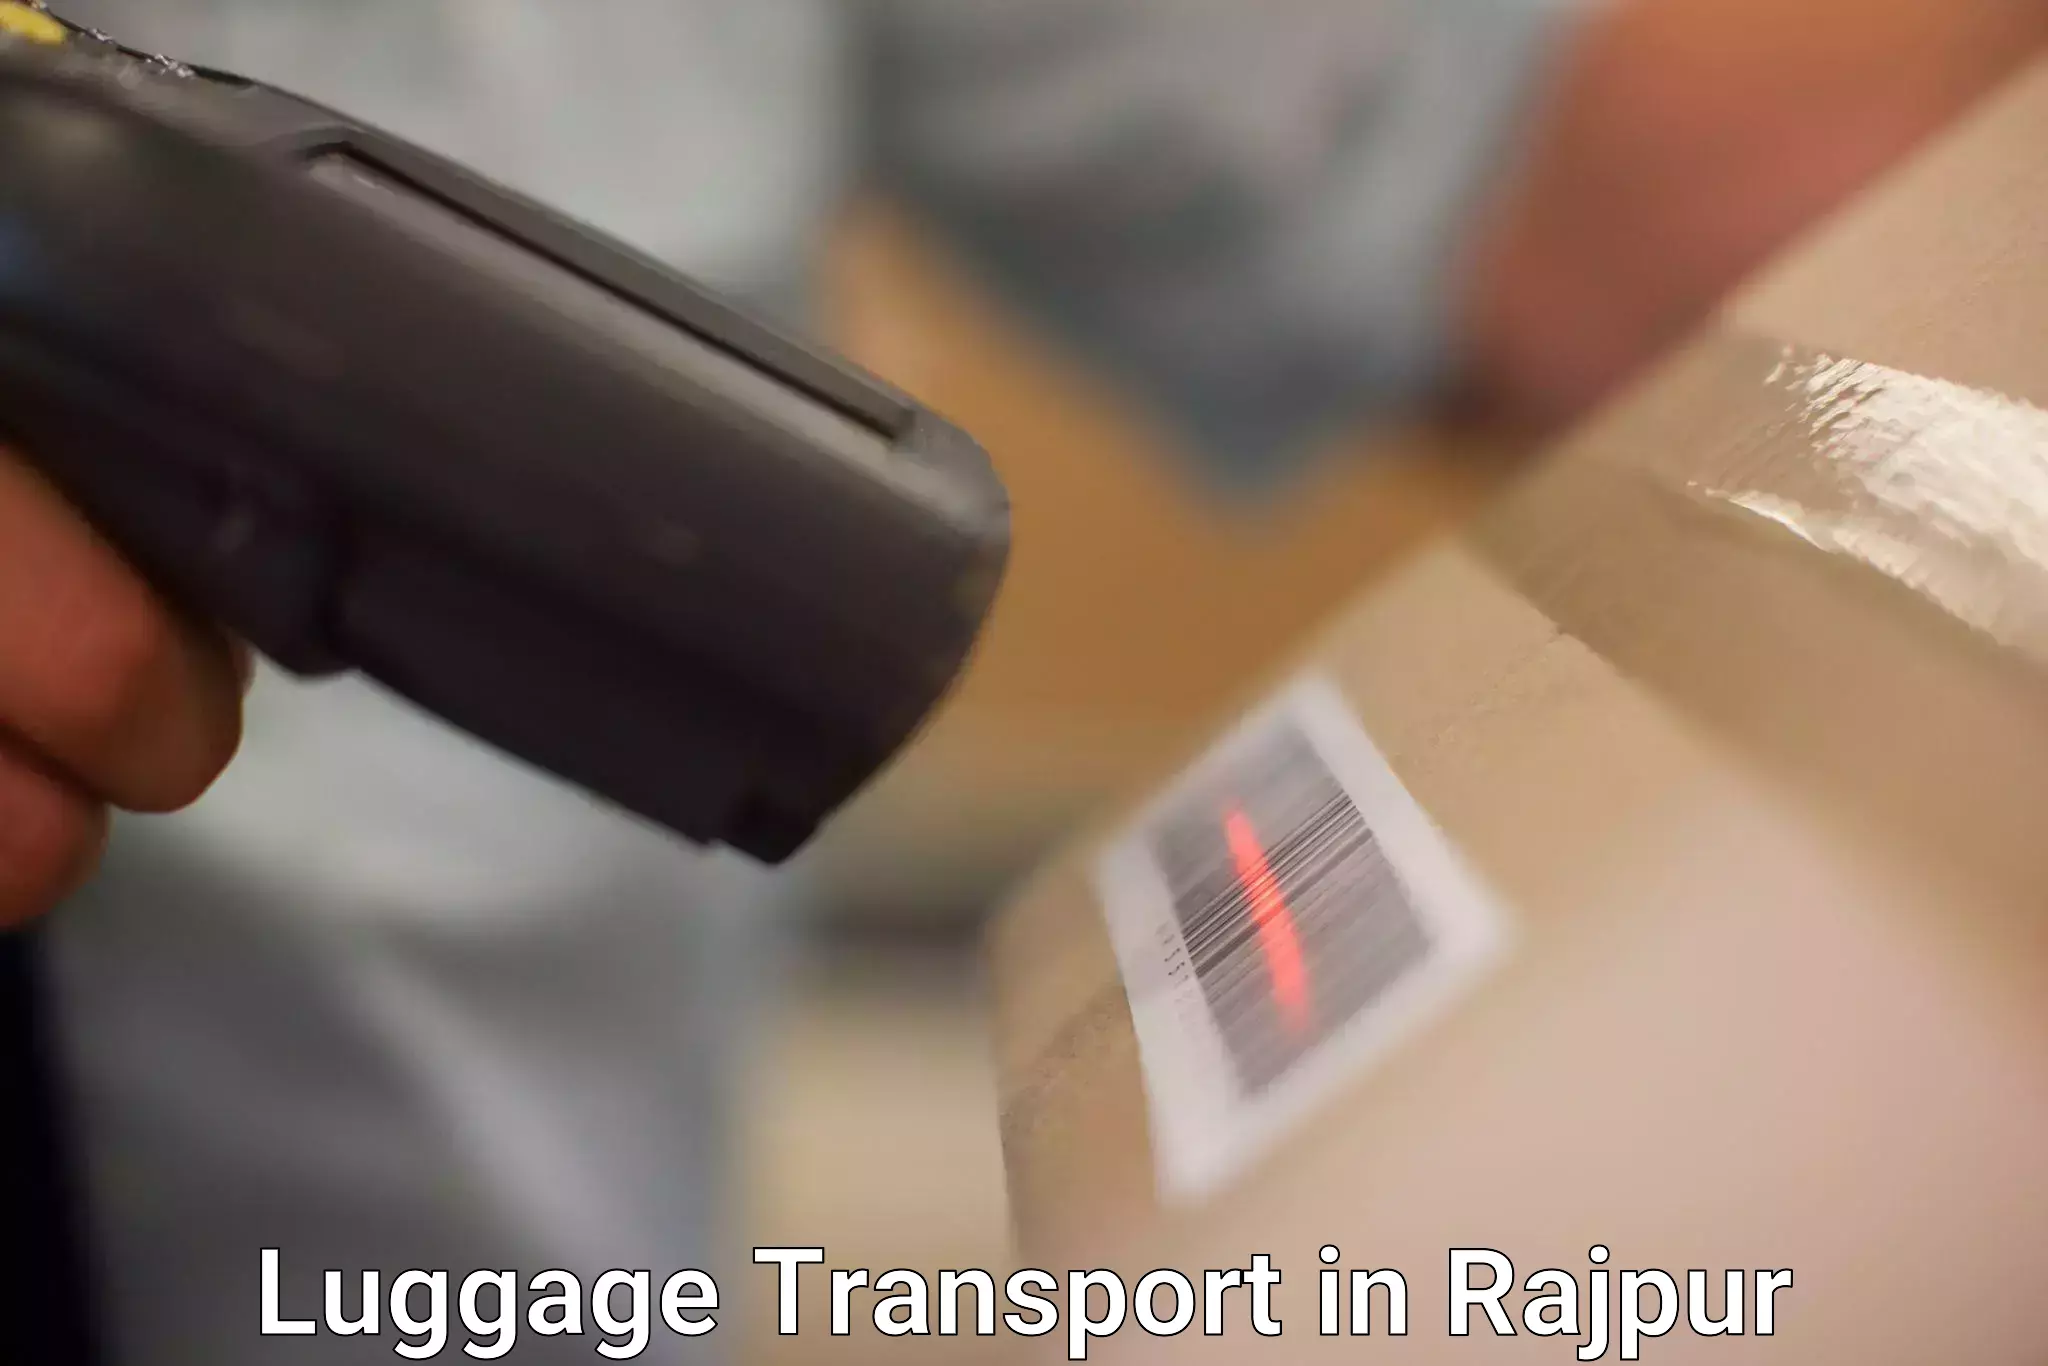 Luggage transport pricing in Rajpur